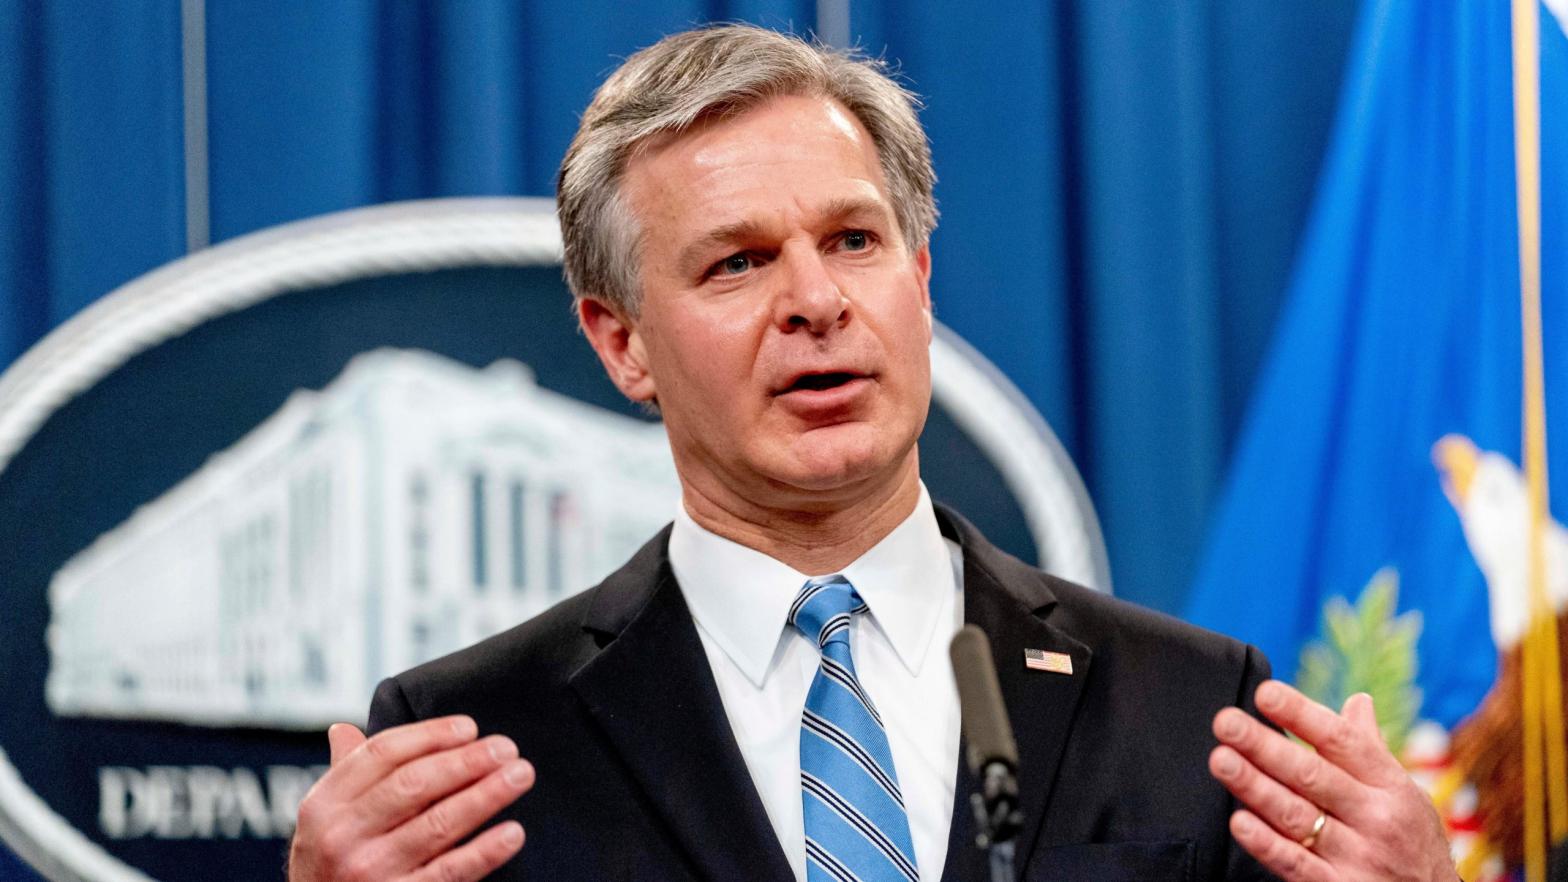 FBI Director Christopher Wray speaks at a news conference at the Justice Department in Washington, Monday, Nov. 8, 2021. (Photo: Andrew Harnik, AP)